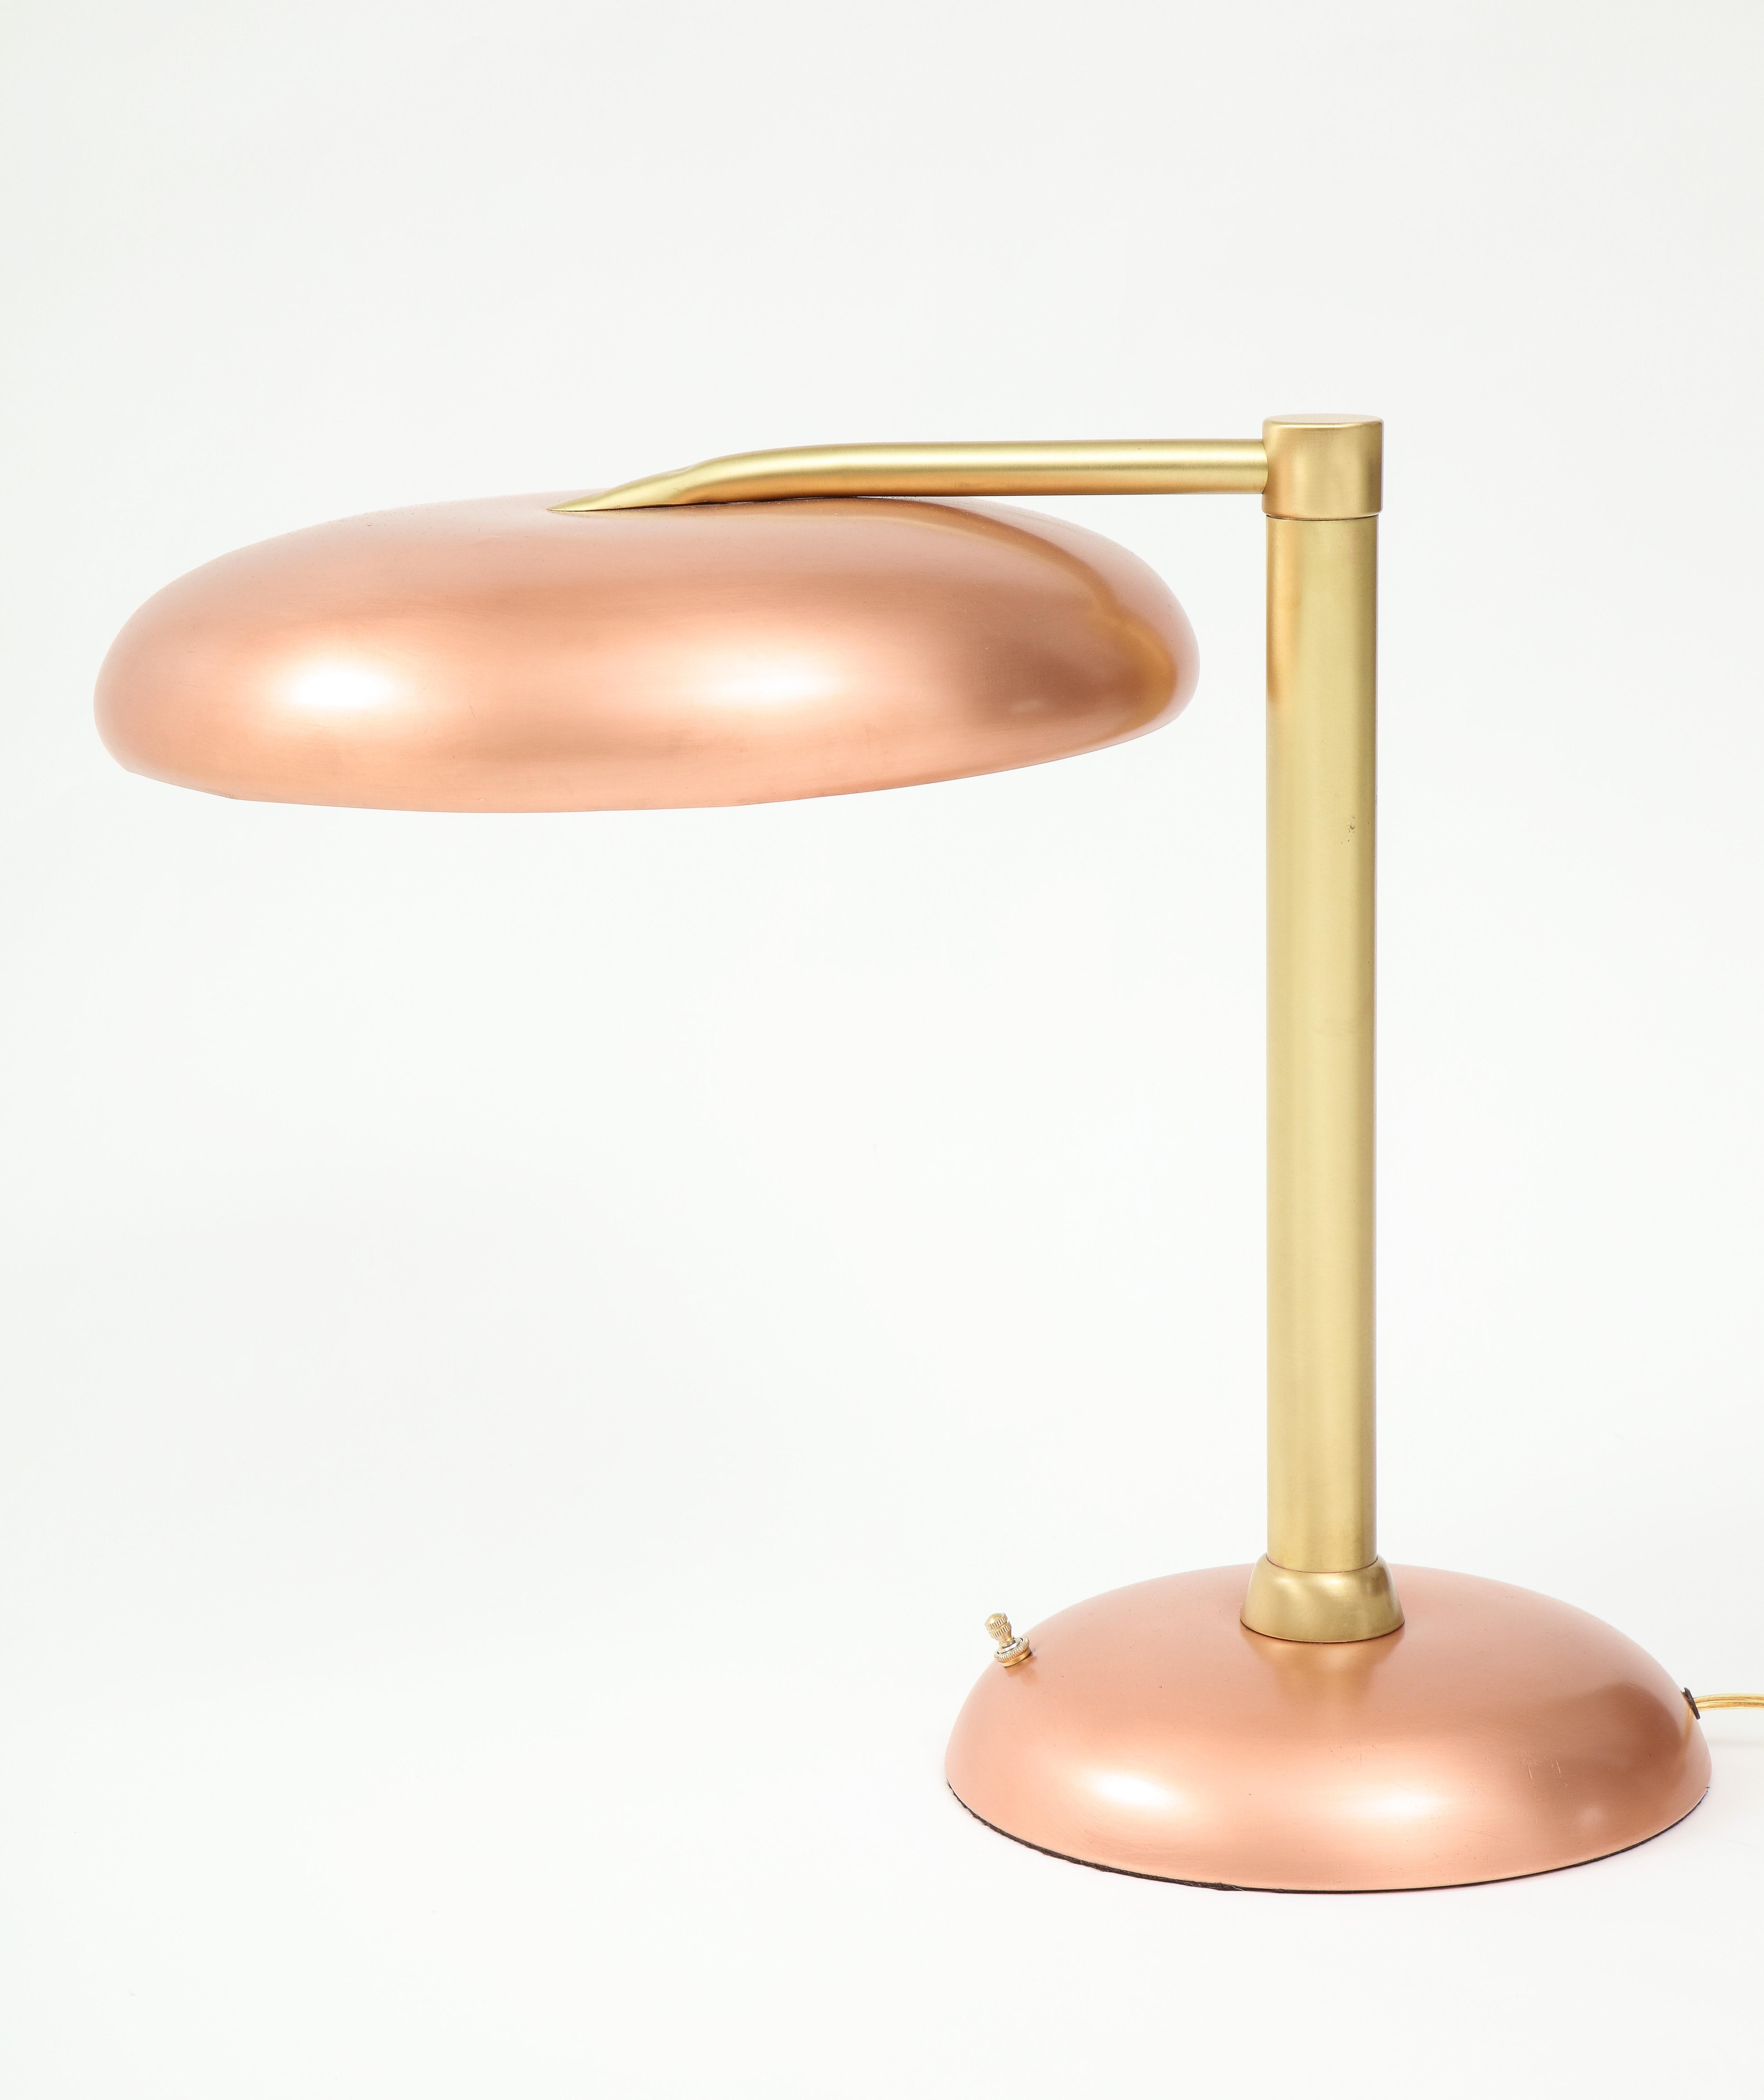 Stunning 1940s large brass and copper Art Deco desk lamp, fully restored and rewired ready to use.